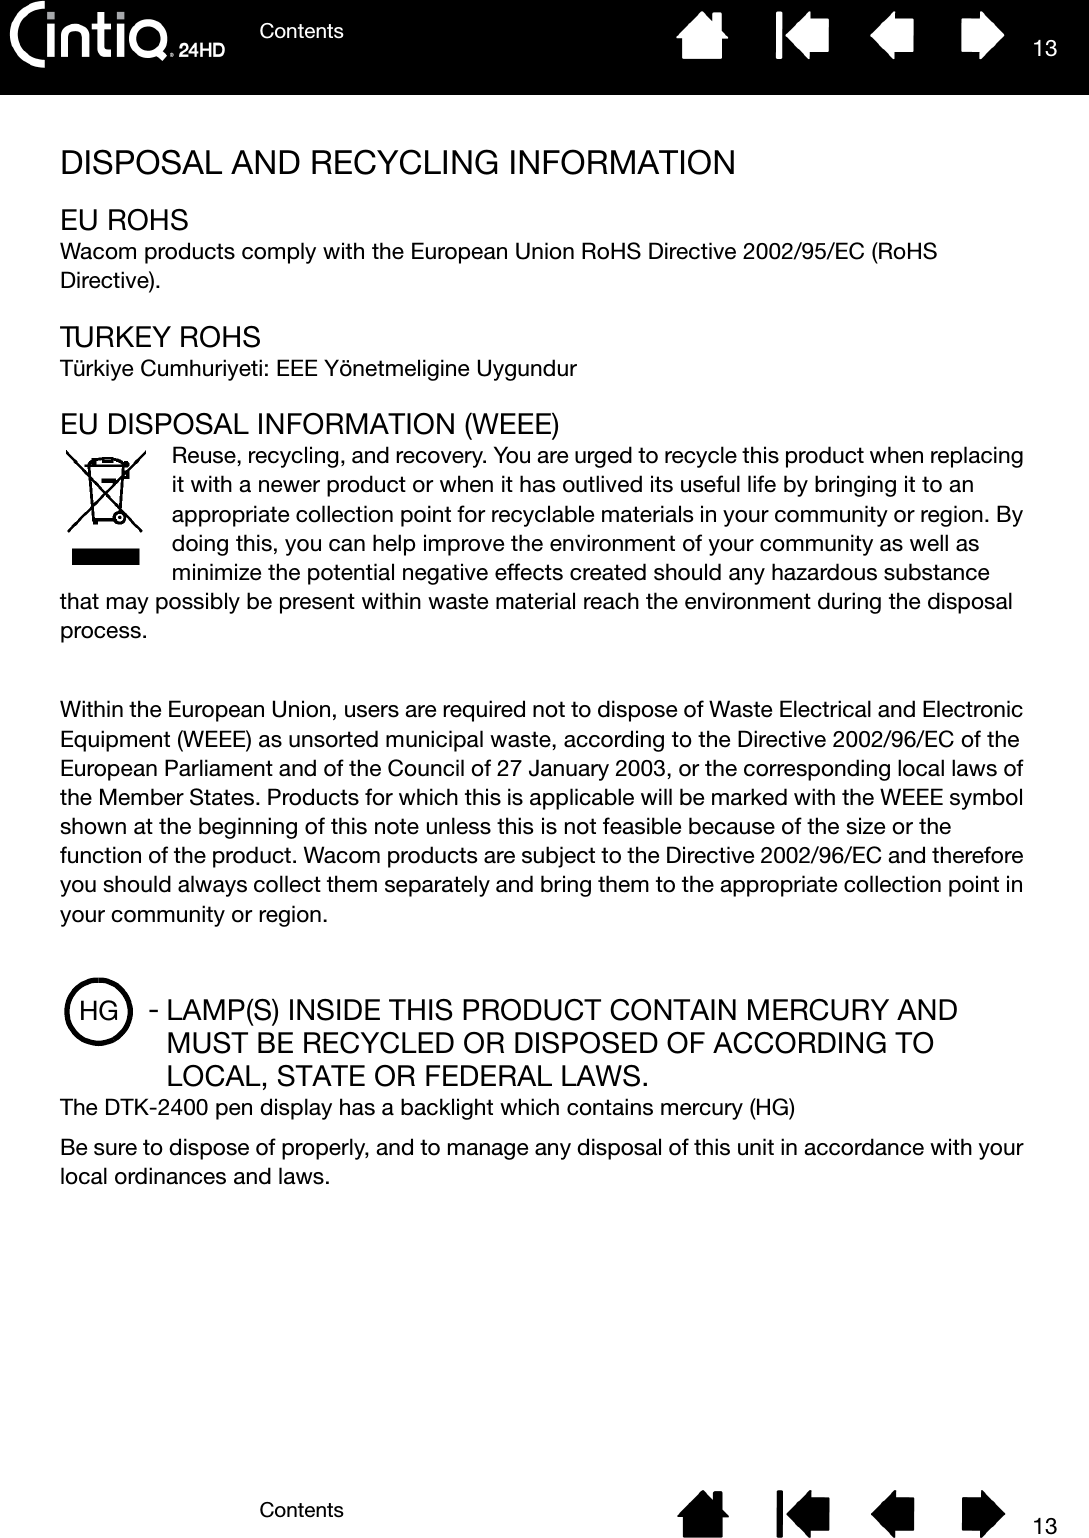 ContentsContents 1313DISPOSAL AND RECYCLING INFORMATIONEU ROHSWacom products comply with the European Union RoHS Directive 2002/95/EC (RoHS Directive).TURKEY ROHSTürkiye Cumhuriyeti: EEE Yönetmeligine UygundurEU DISPOSAL INFORMATION (WEEE)Reuse, recycling, and recovery. You are urged to recycle this product when replacing it with a newer product or when it has outlived its useful life by bringing it to an appropriate collection point for recyclable materials in your community or region. By doing this, you can help improve the environment of your community as well as minimize the potential negative effects created should any hazardous substance that may possibly be present within waste material reach the environment during the disposal process.Within the European Union, users are required not to dispose of Waste Electrical and Electronic Equipment (WEEE) as unsorted municipal waste, according to the Directive 2002/96/EC of the European Parliament and of the Council of 27 January 2003, or the corresponding local laws of the Member States. Products for which this is applicable will be marked with the WEEE symbol shown at the beginning of this note unless this is not feasible because of the size or the function of the product. Wacom products are subject to the Directive 2002/96/EC and therefore you should always collect them separately and bring them to the appropriate collection point in your community or region.LAMP(S) INSIDE THIS PRODUCT CONTAIN MERCURY AND MUST BE RECYCLED OR DISPOSED OF ACCORDING TO LOCAL, STATE OR FEDERAL LAWS.The DTK-2400 pen display has a backlight which contains mercury (HG)Be sure to dispose of properly, and to manage any disposal of this unit in accordance with your local ordinances and laws.HG -